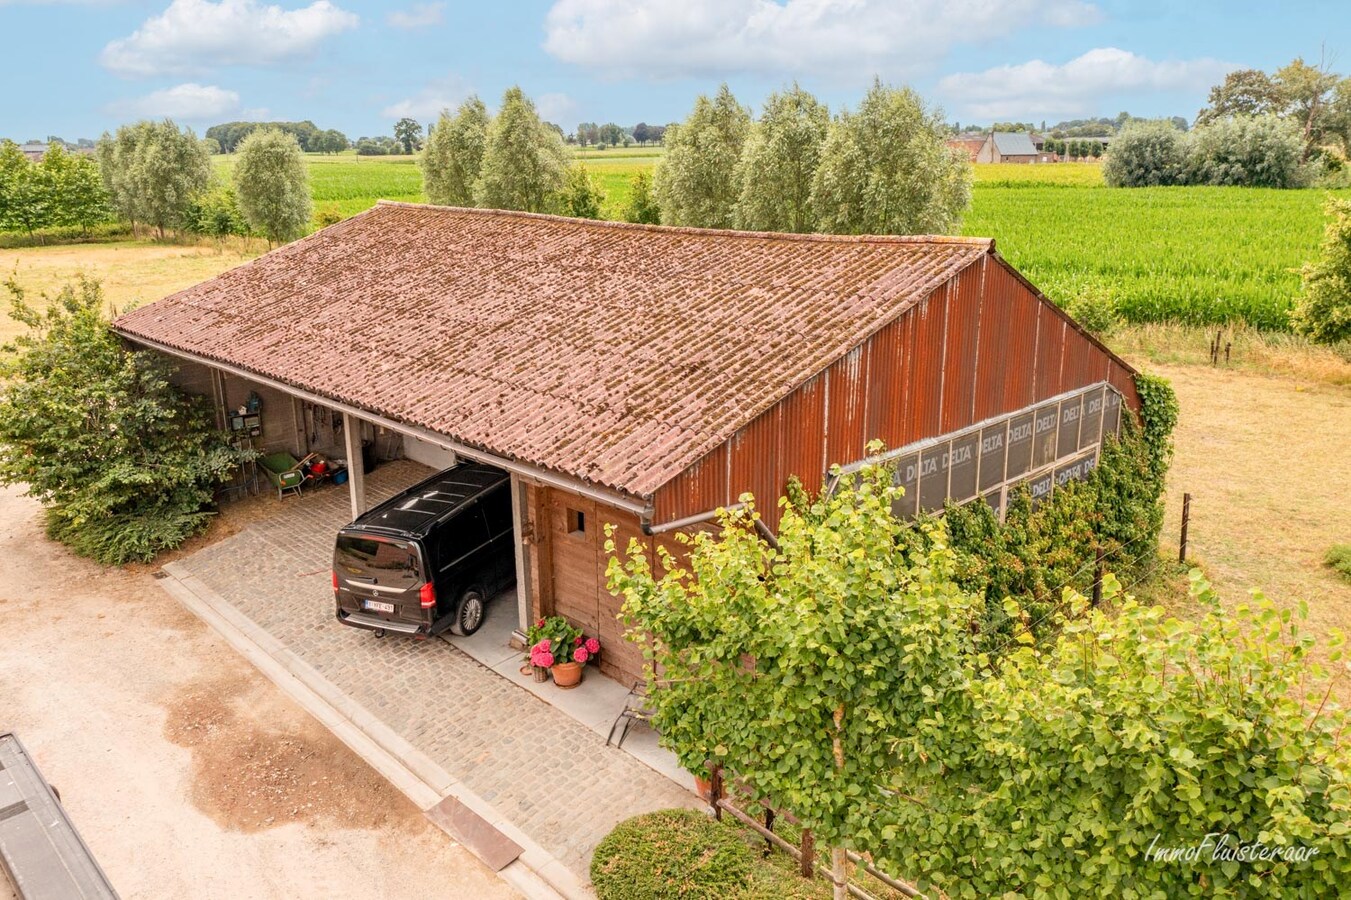 Rural property located in Aalter, Lotenhulle, on approximately 8,000 m2. 